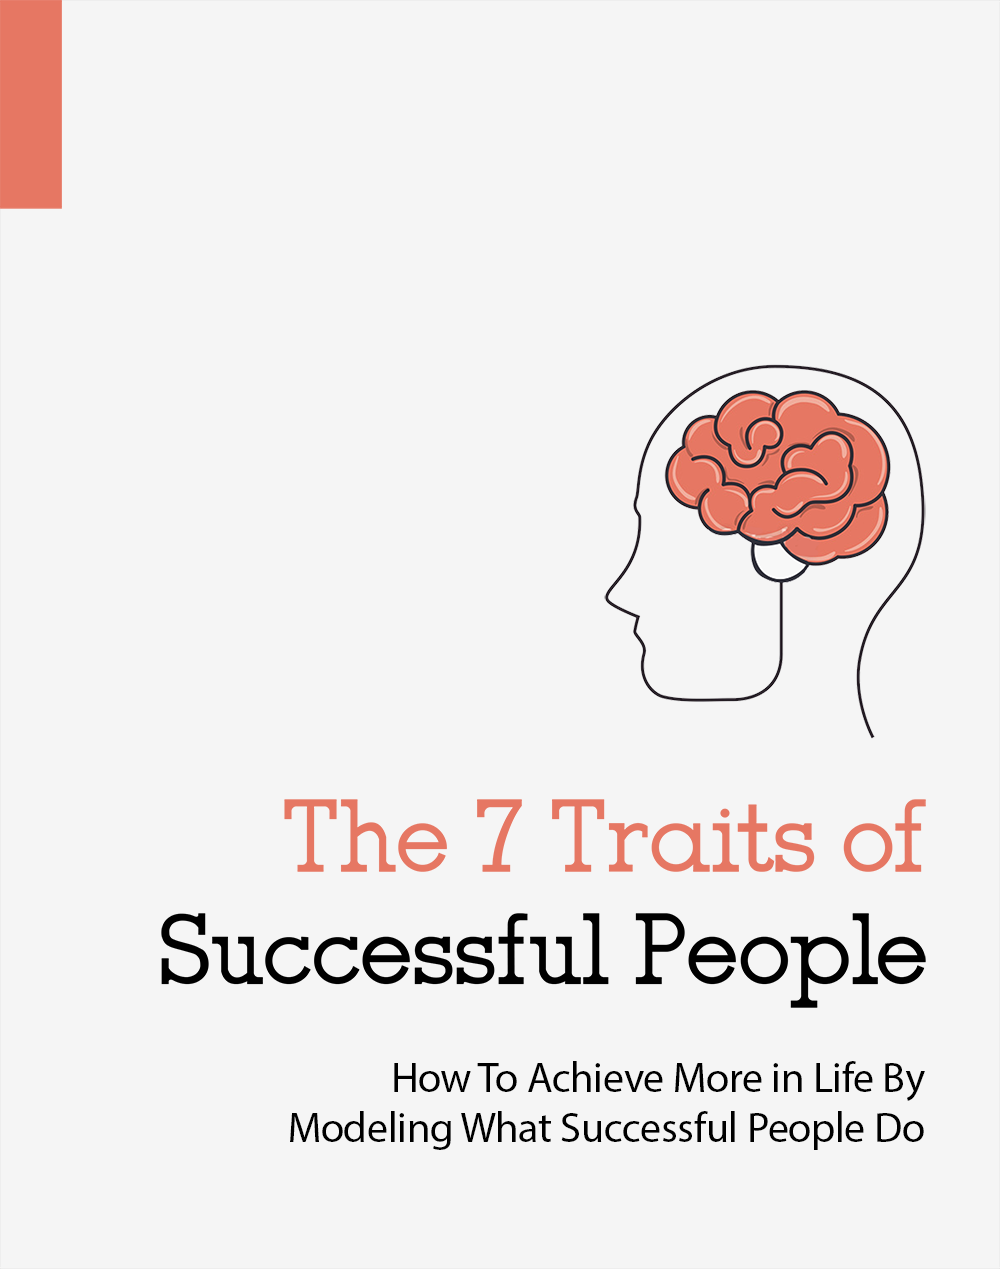 The 7 Traits of Successful People